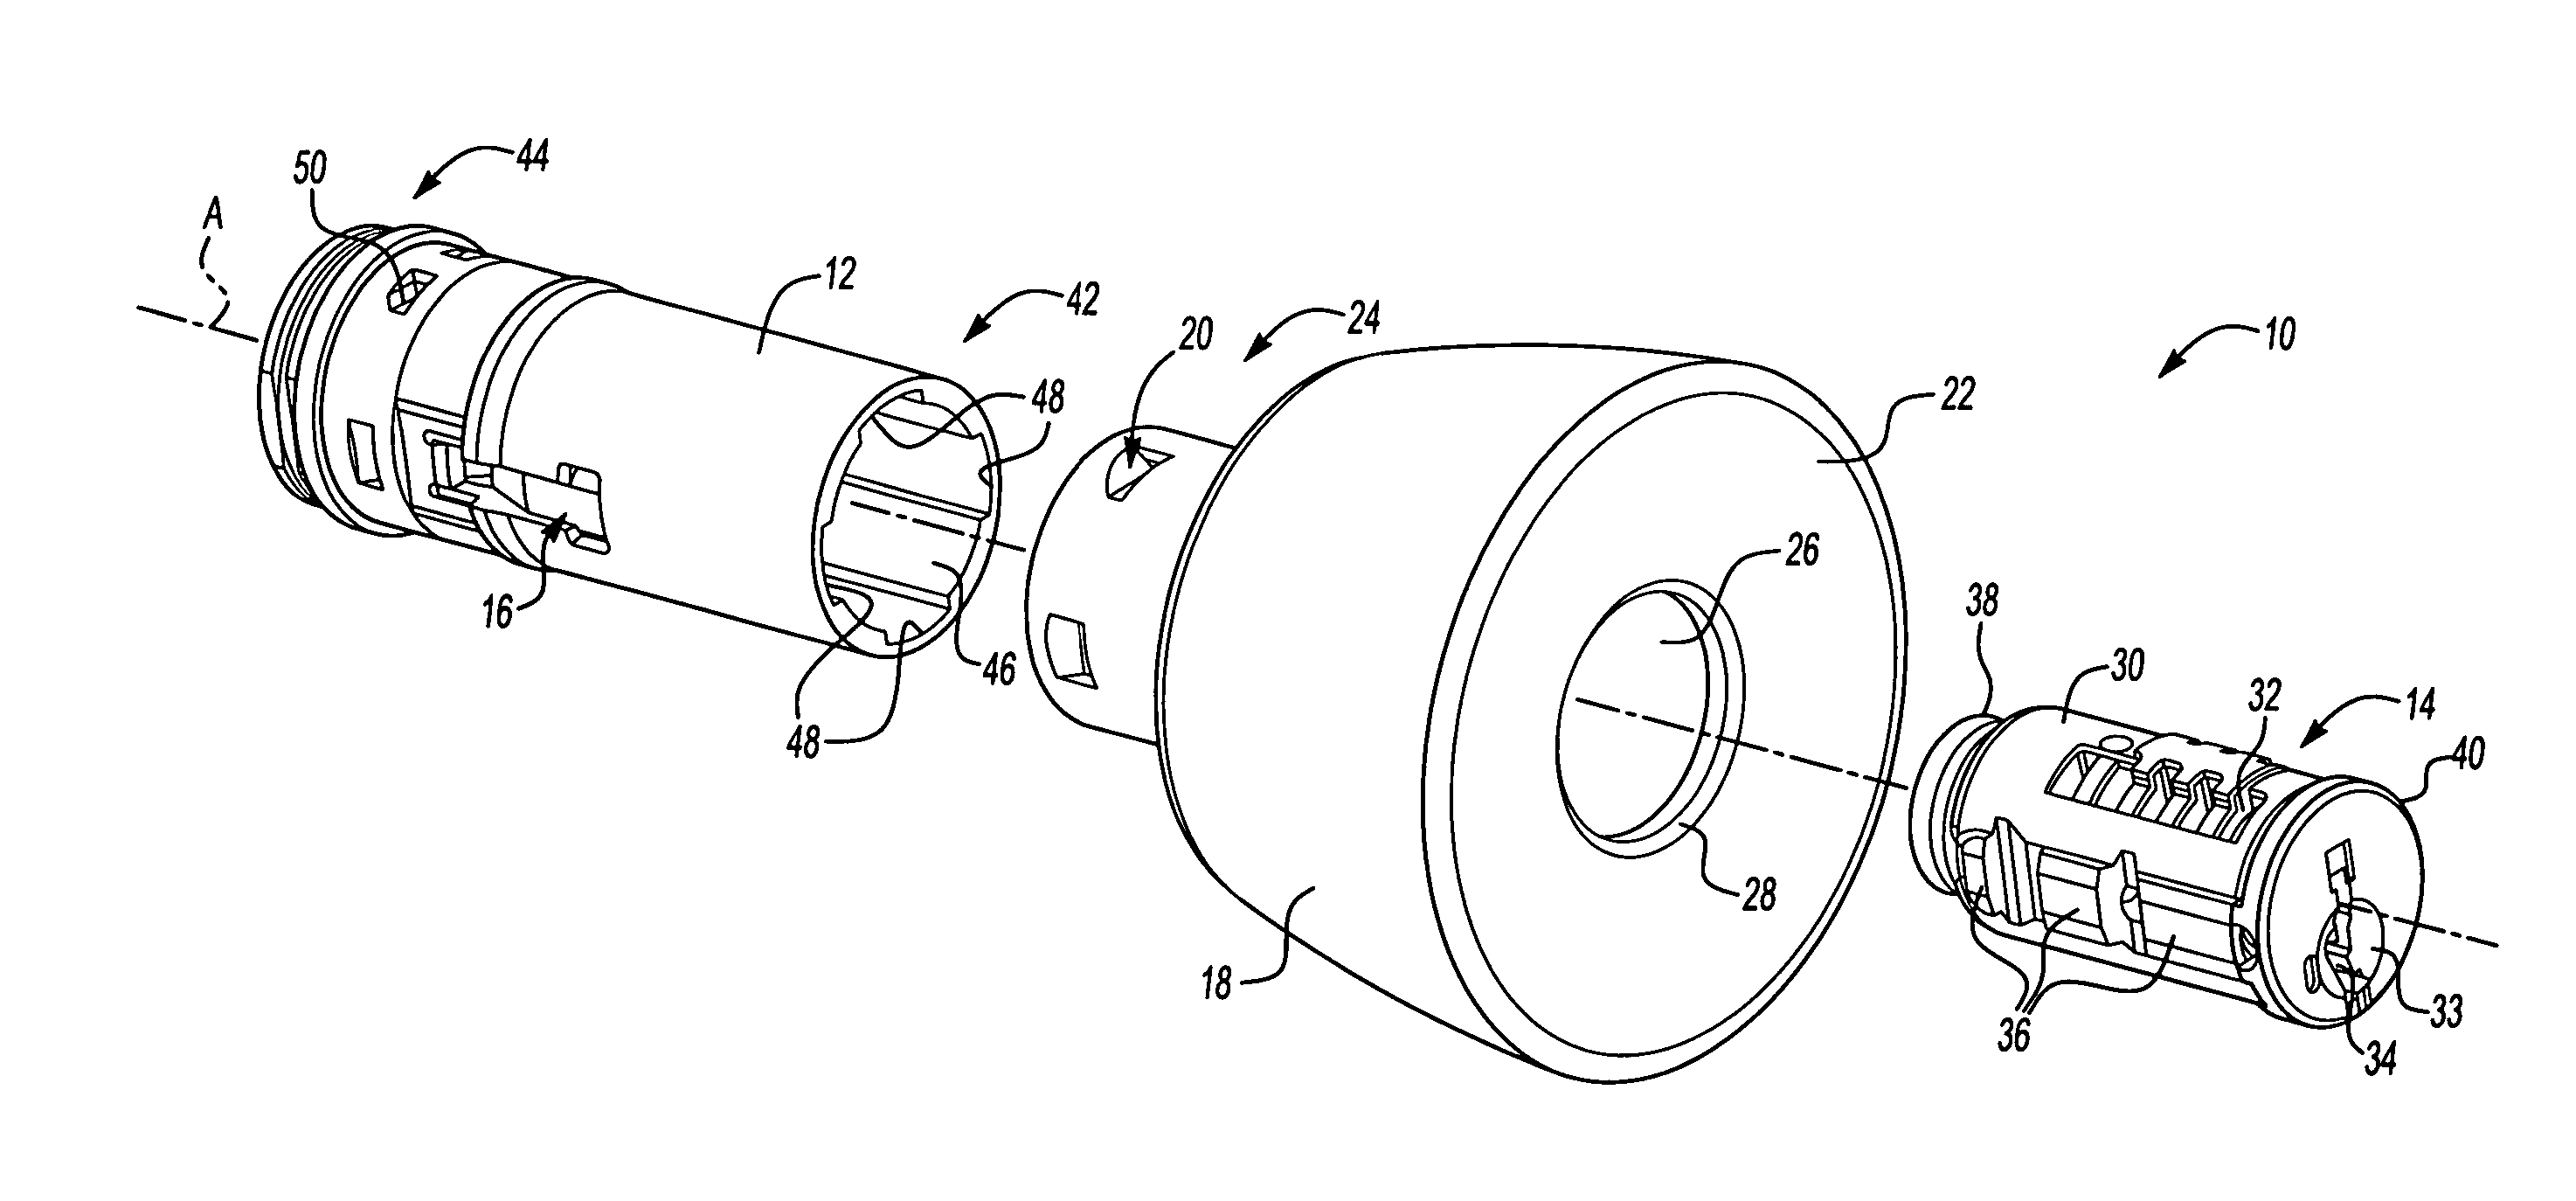 Front loading lock assembly